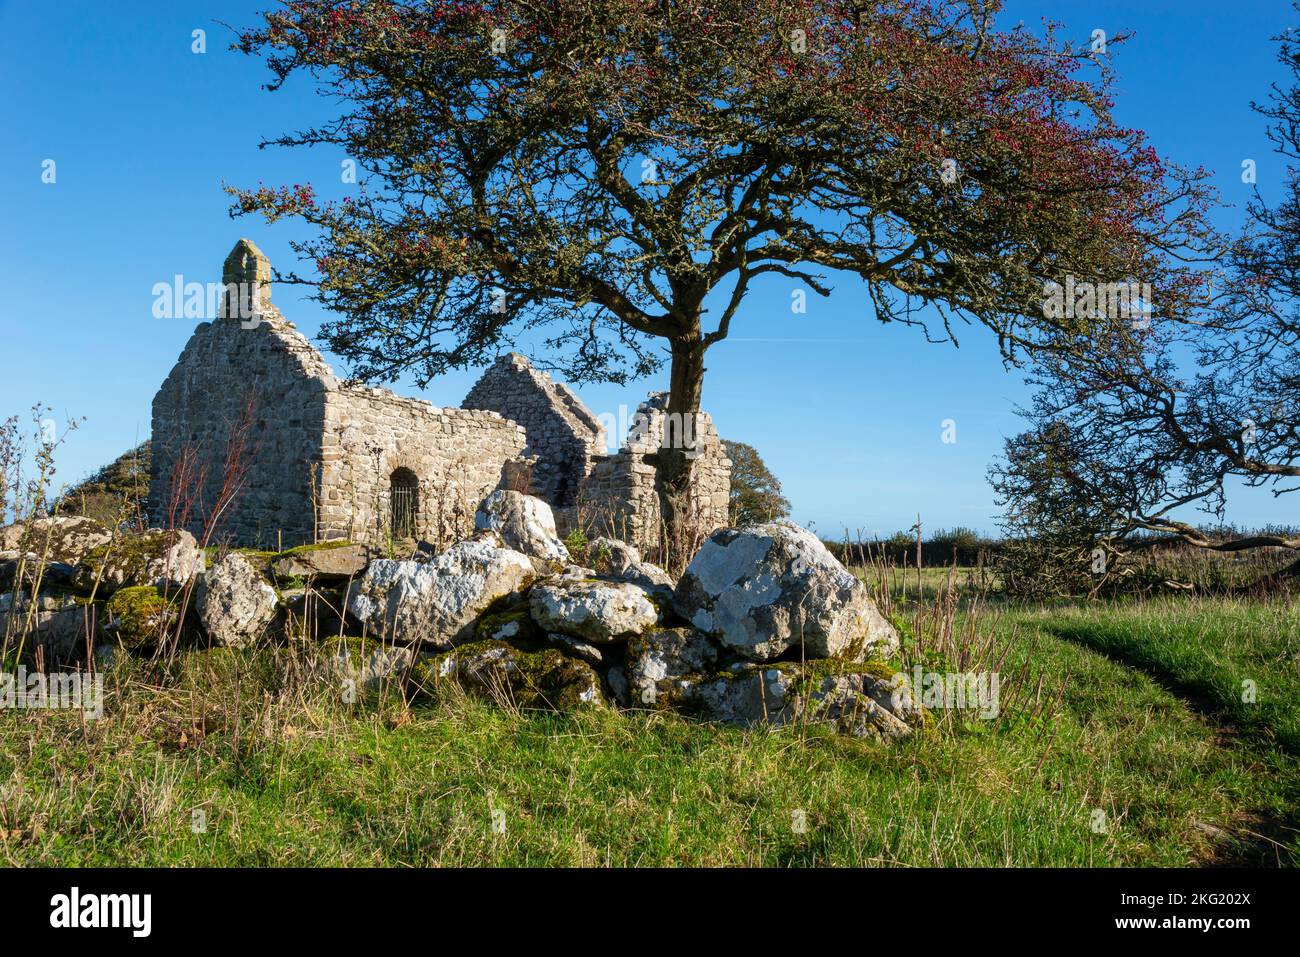 Capel Lligwy, a 12th century ruined building near Moelfre on the coast of Anglesey, North Wales. Stock Photo